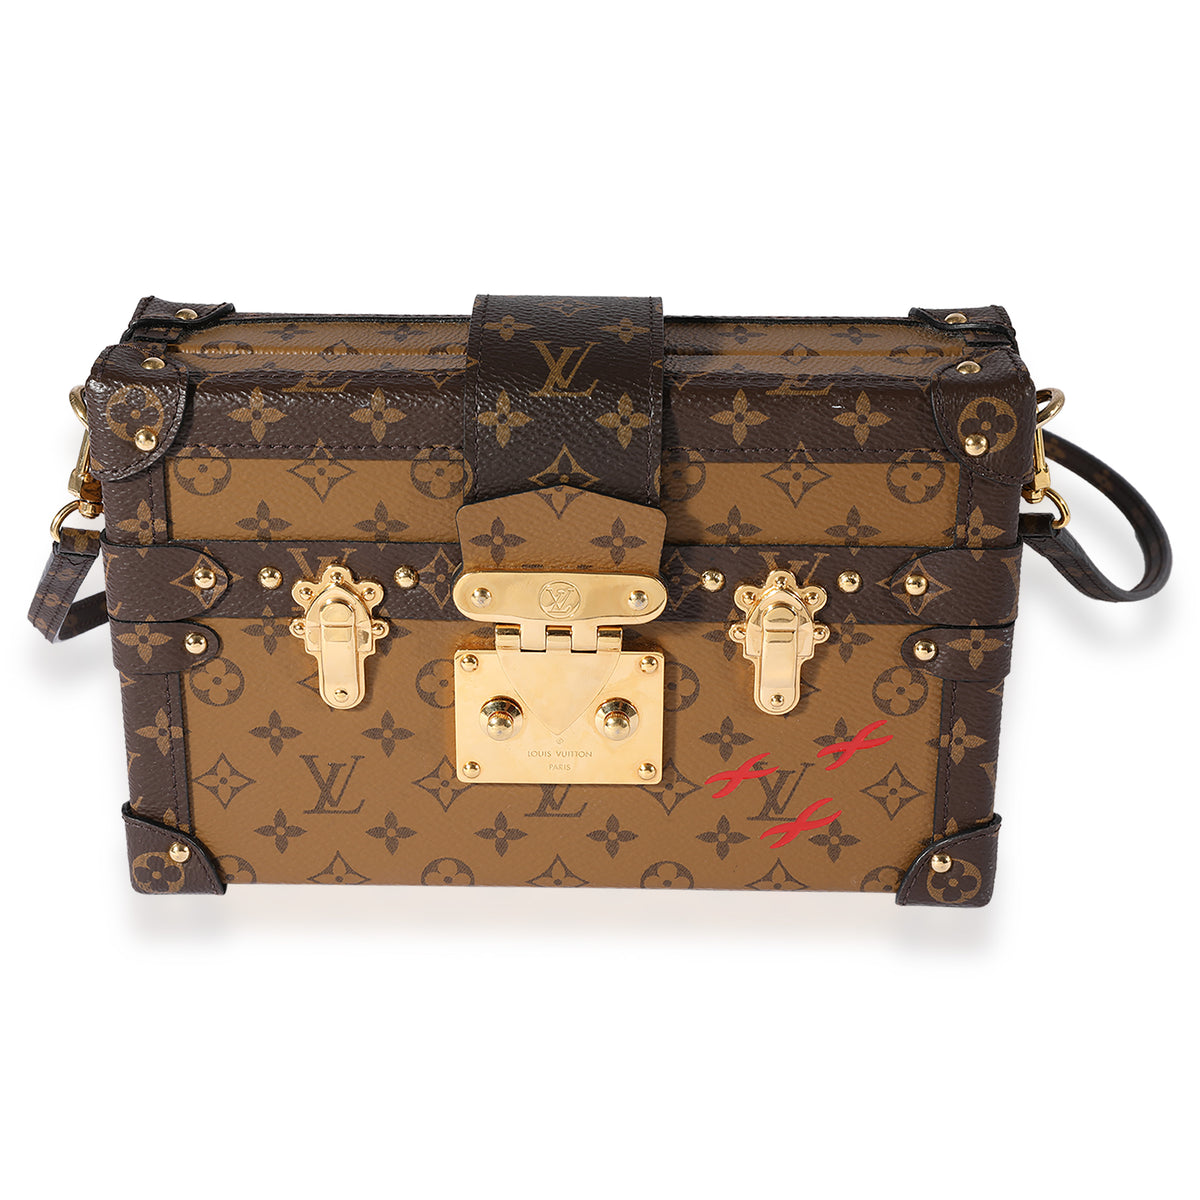 Louis Vuitton Mother-of-Pearl Petite Malle Cross-Body Bag